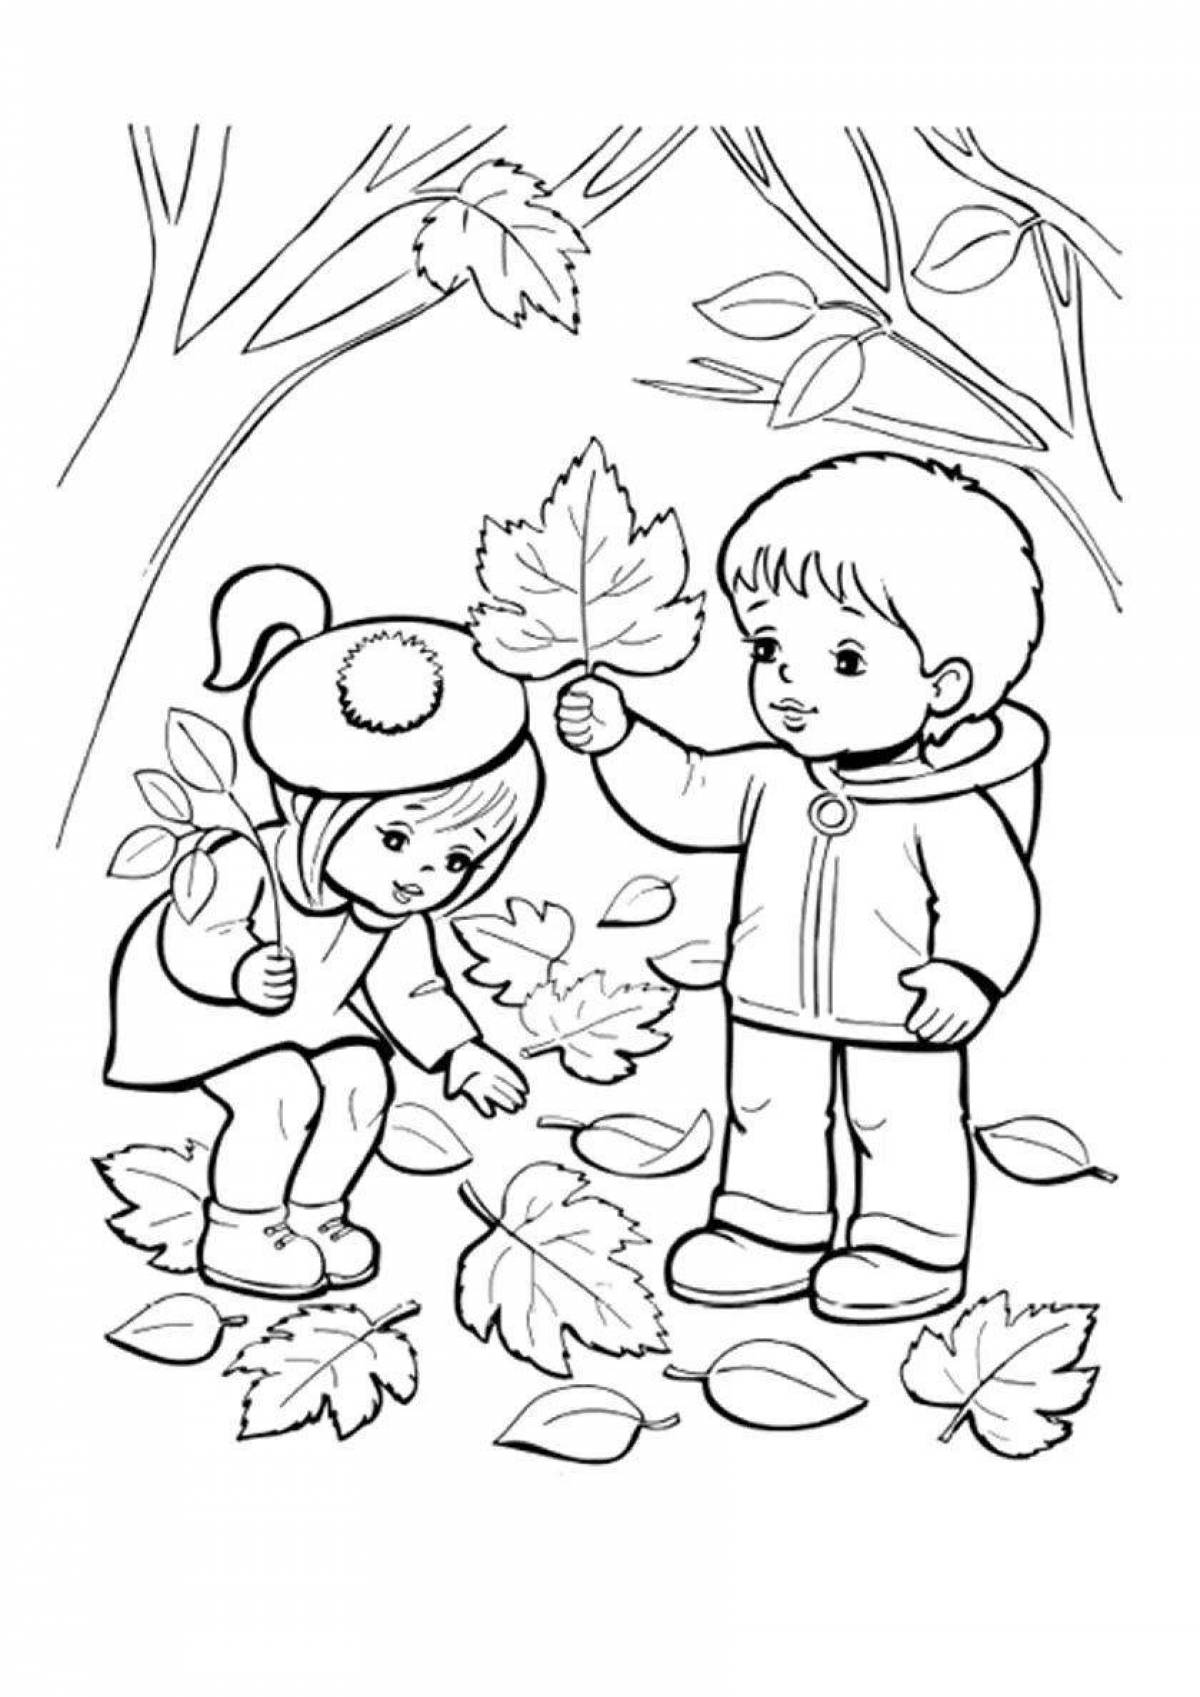 Beautiful autumn coloring for children 3-4 years old